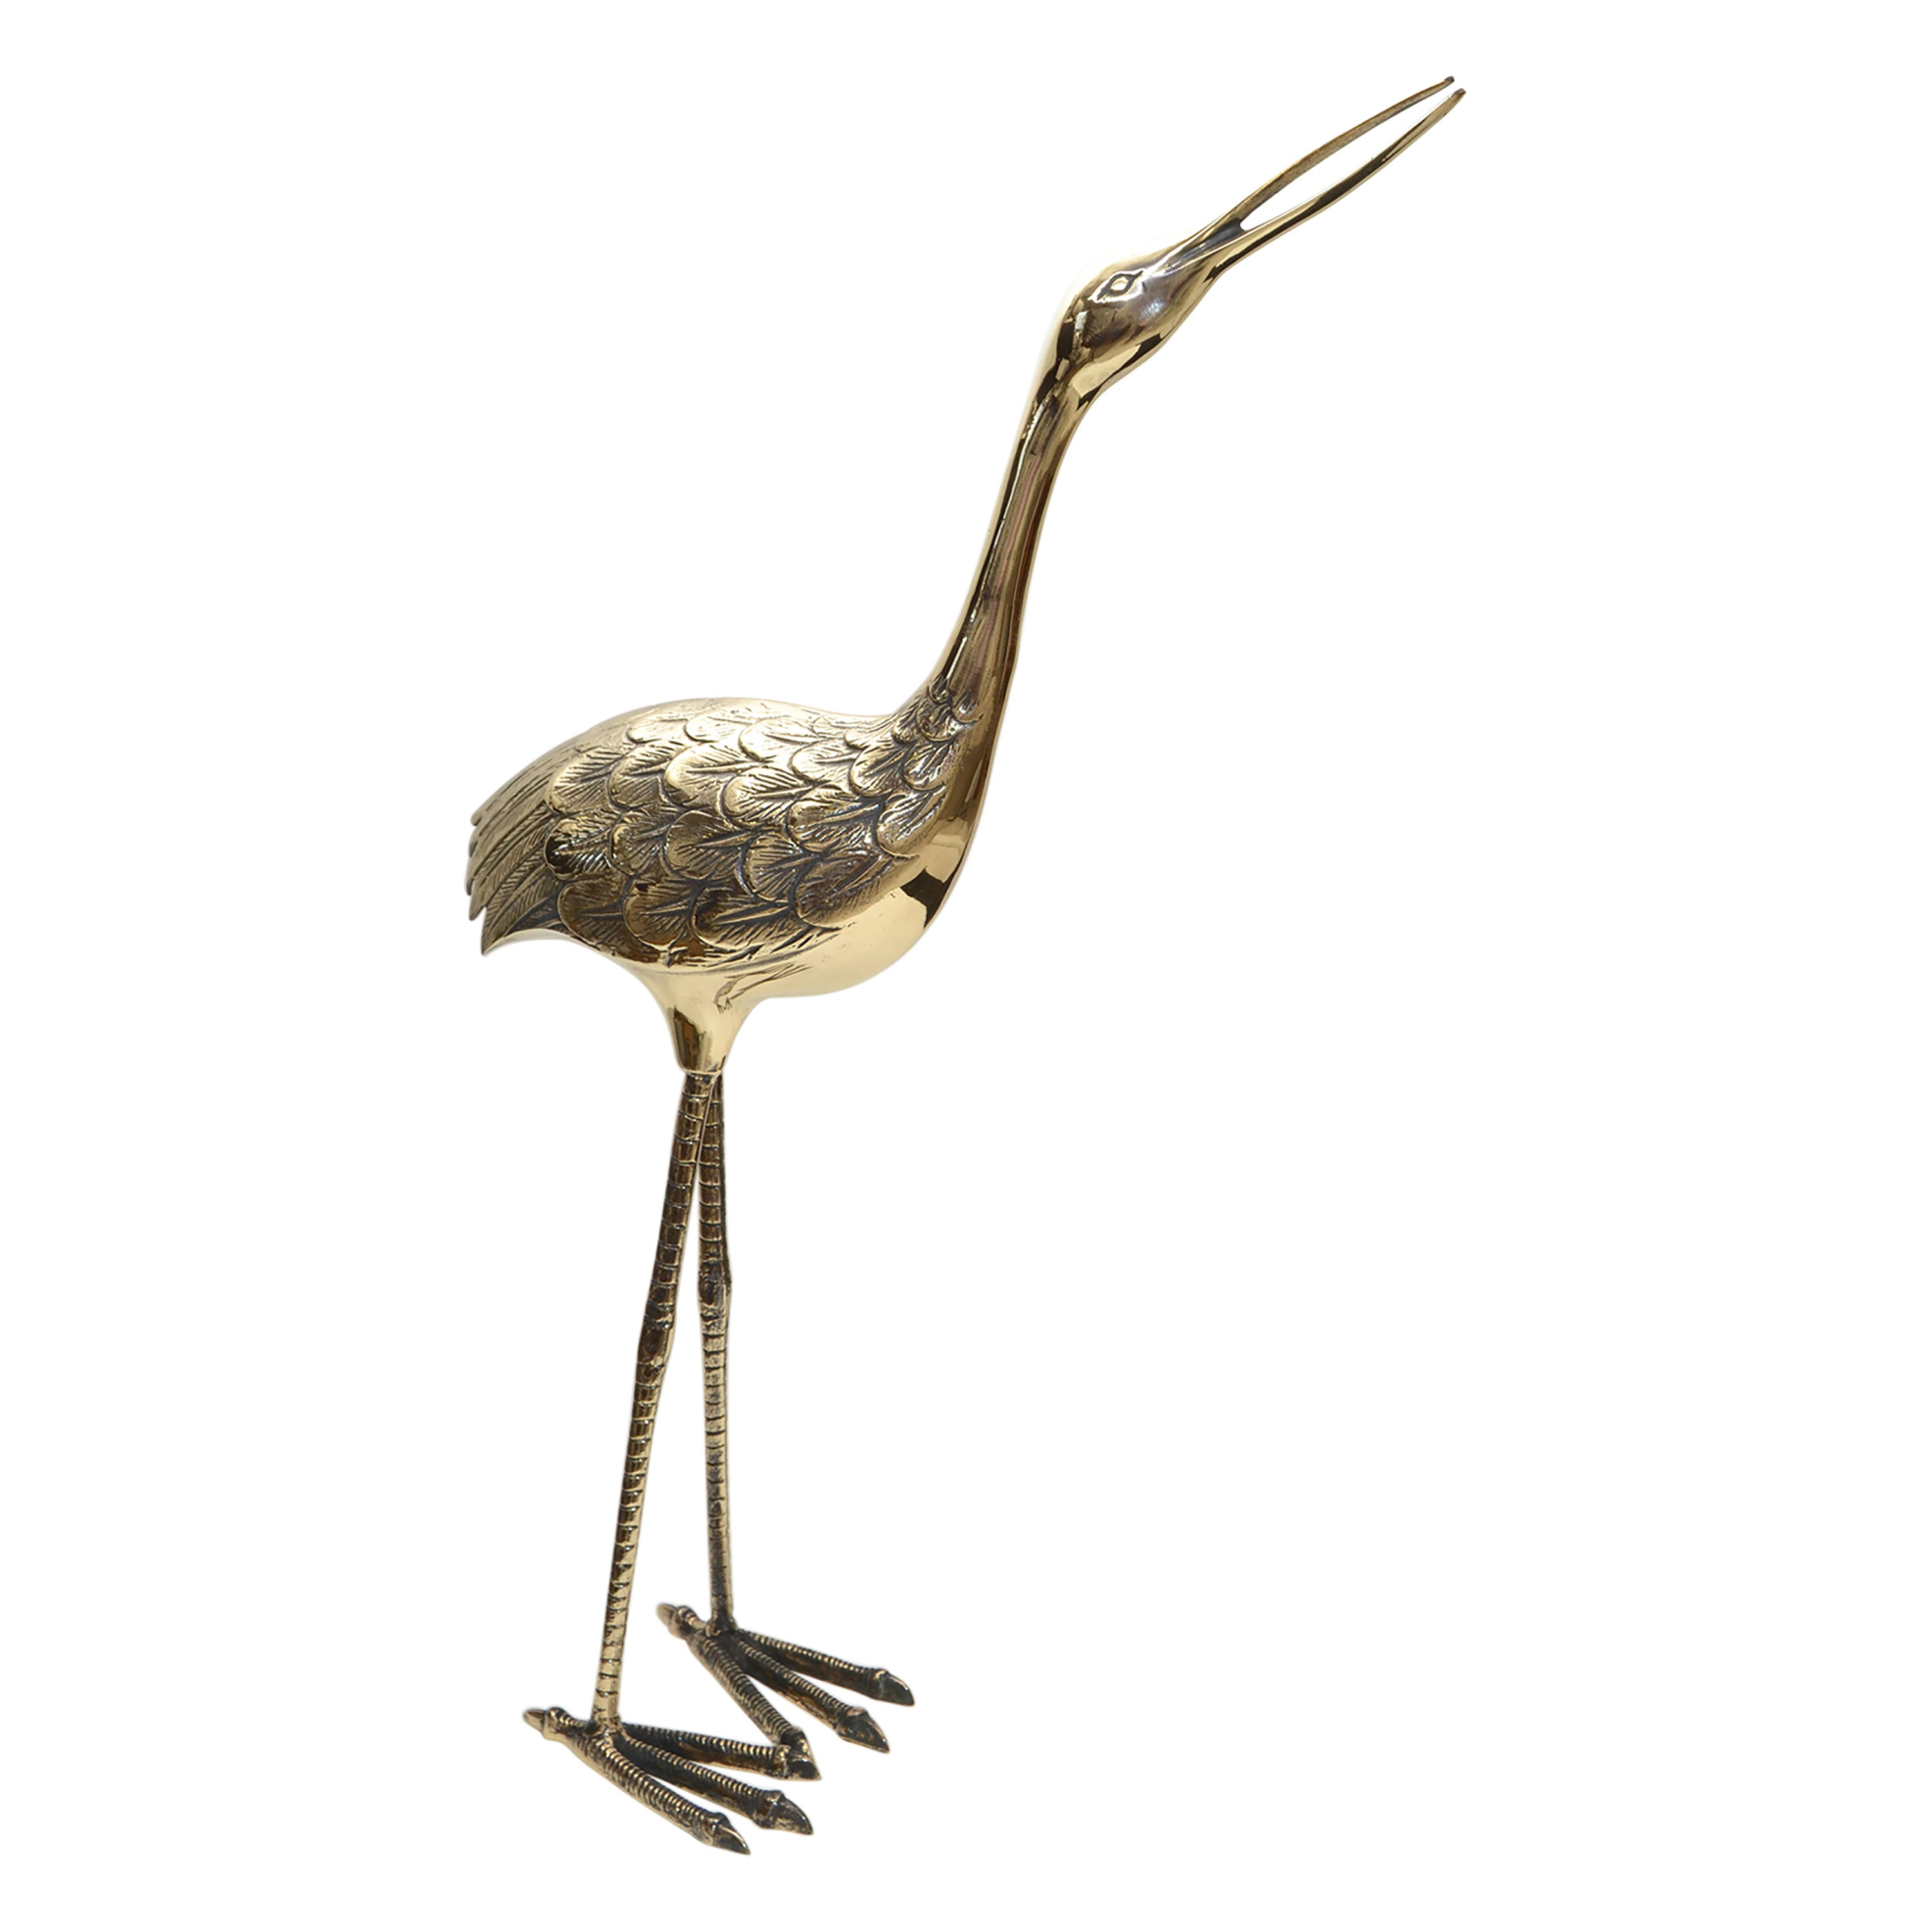 Bronze Crane Life-Size Animal Sculpture Handcrafted Mid-Century Modern, 1970 For Sale